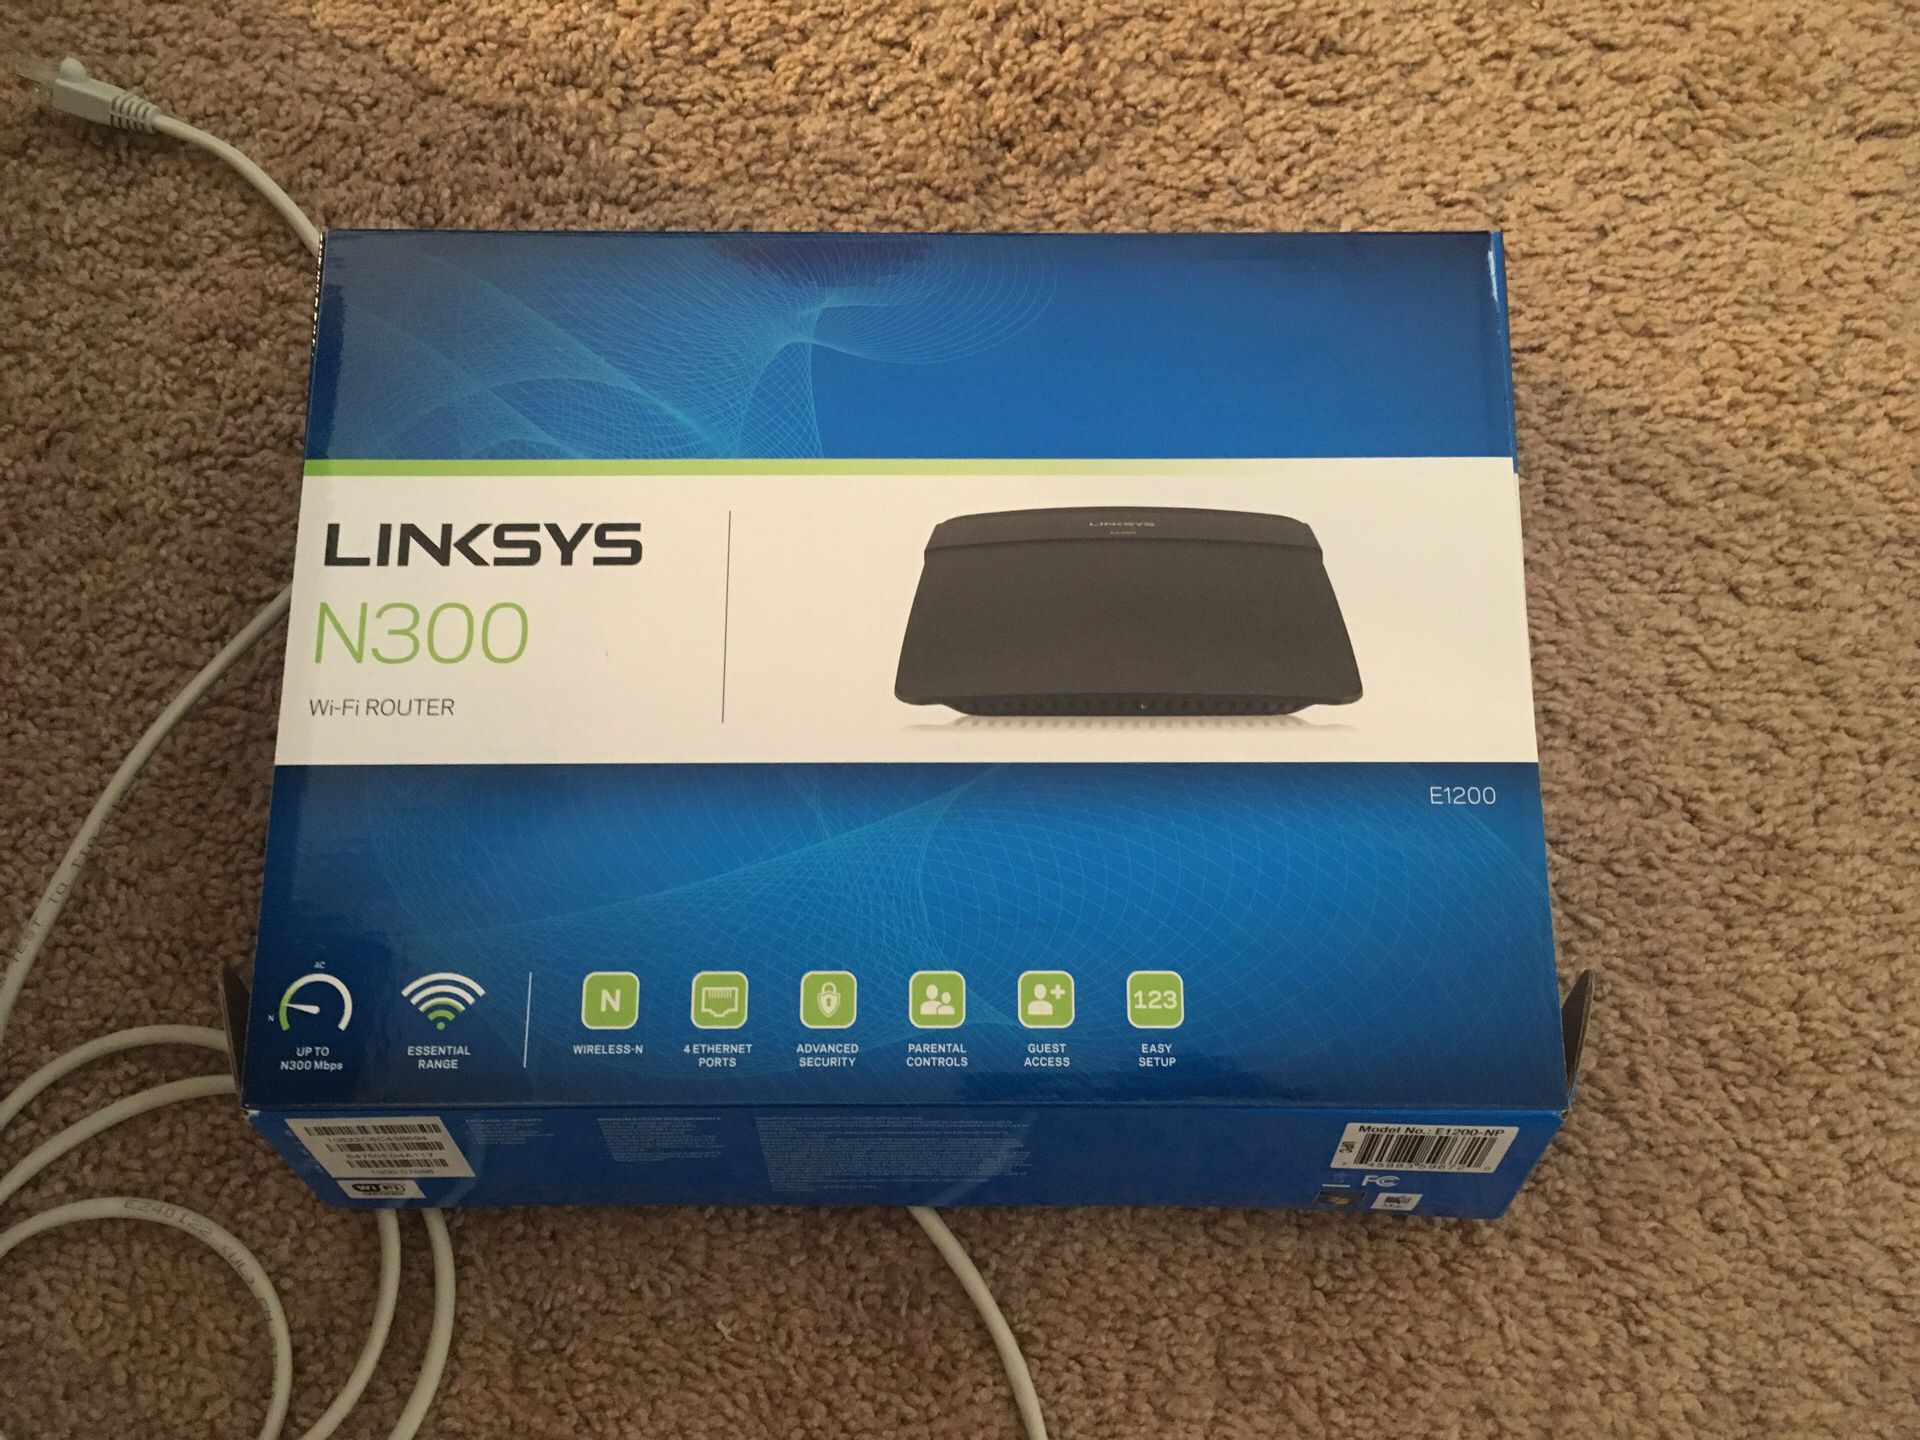 Linksys N300 wiFi router